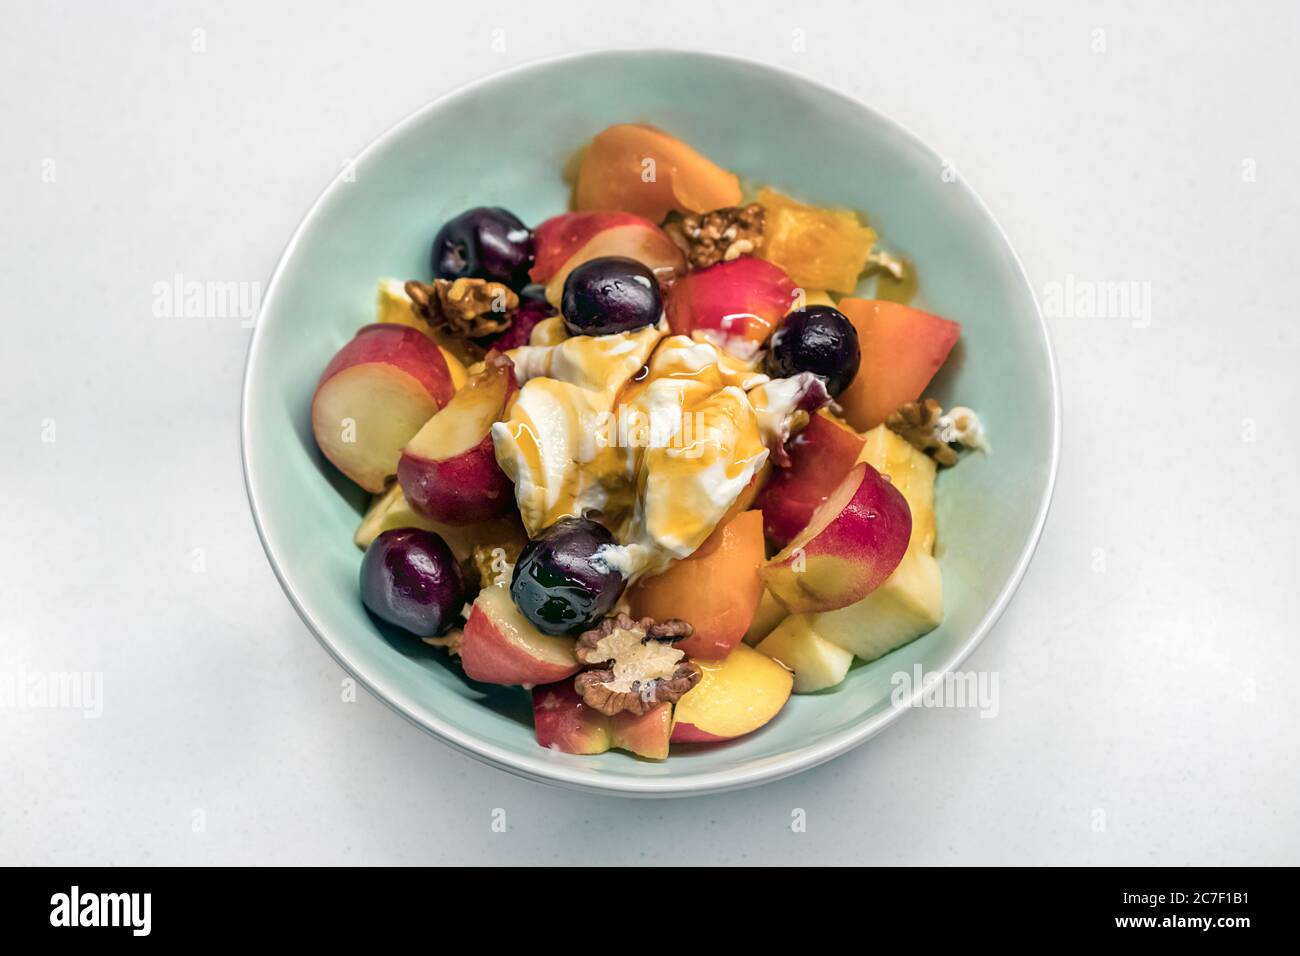 Top view of a home made greek fruit salad with nuts, apple, peach, grapes and yogurt with honey. Stock Photo